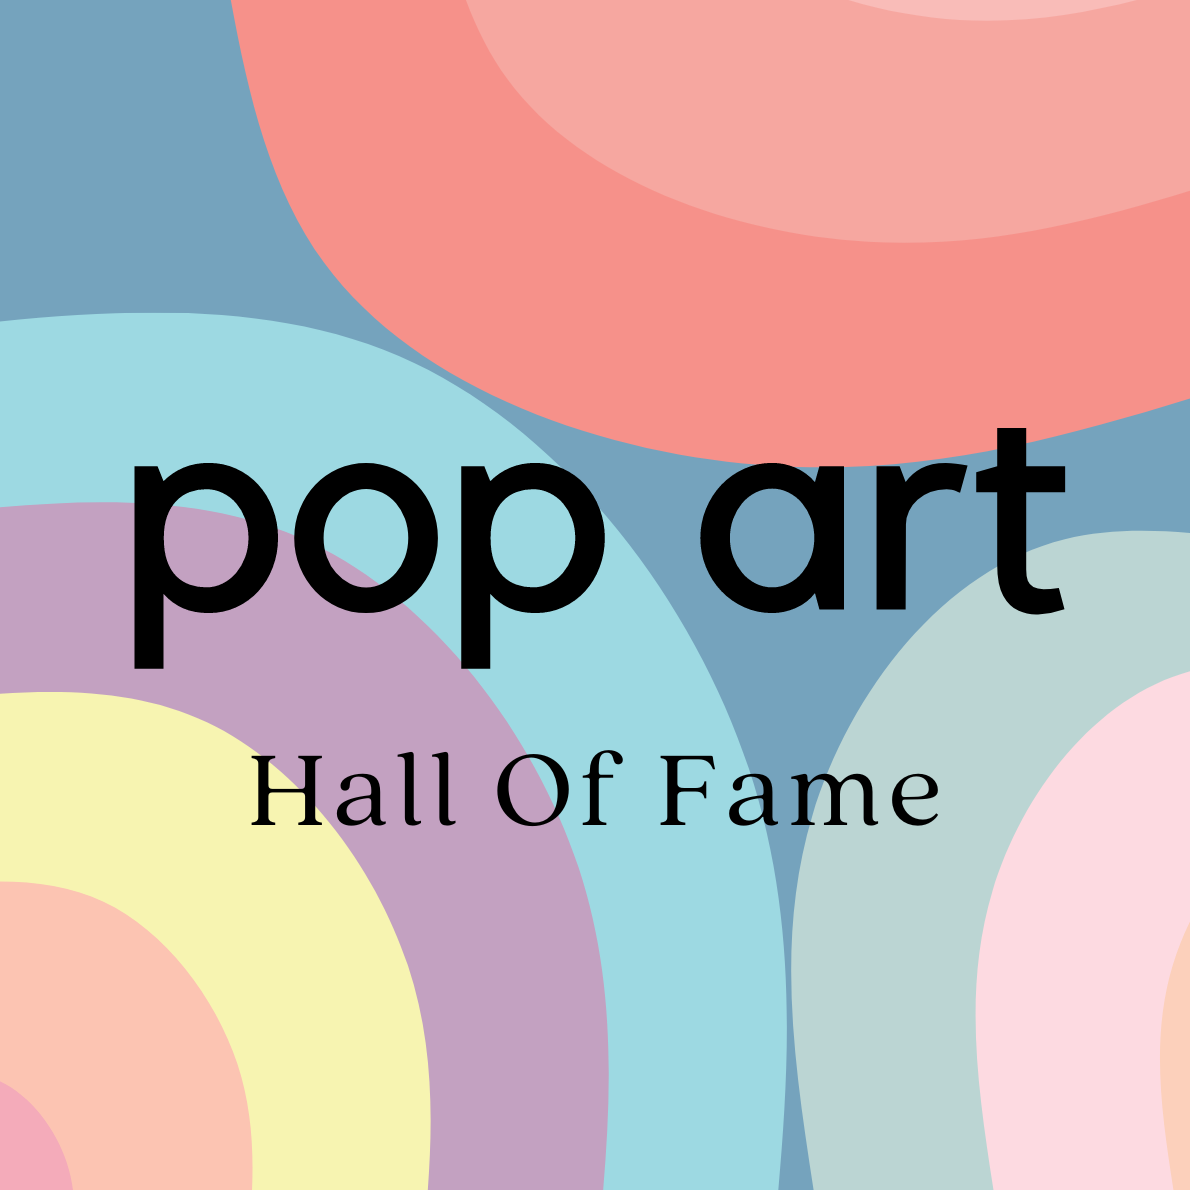 Pop Art Hall of Fame – The 20 artists you NEED TO KNOW